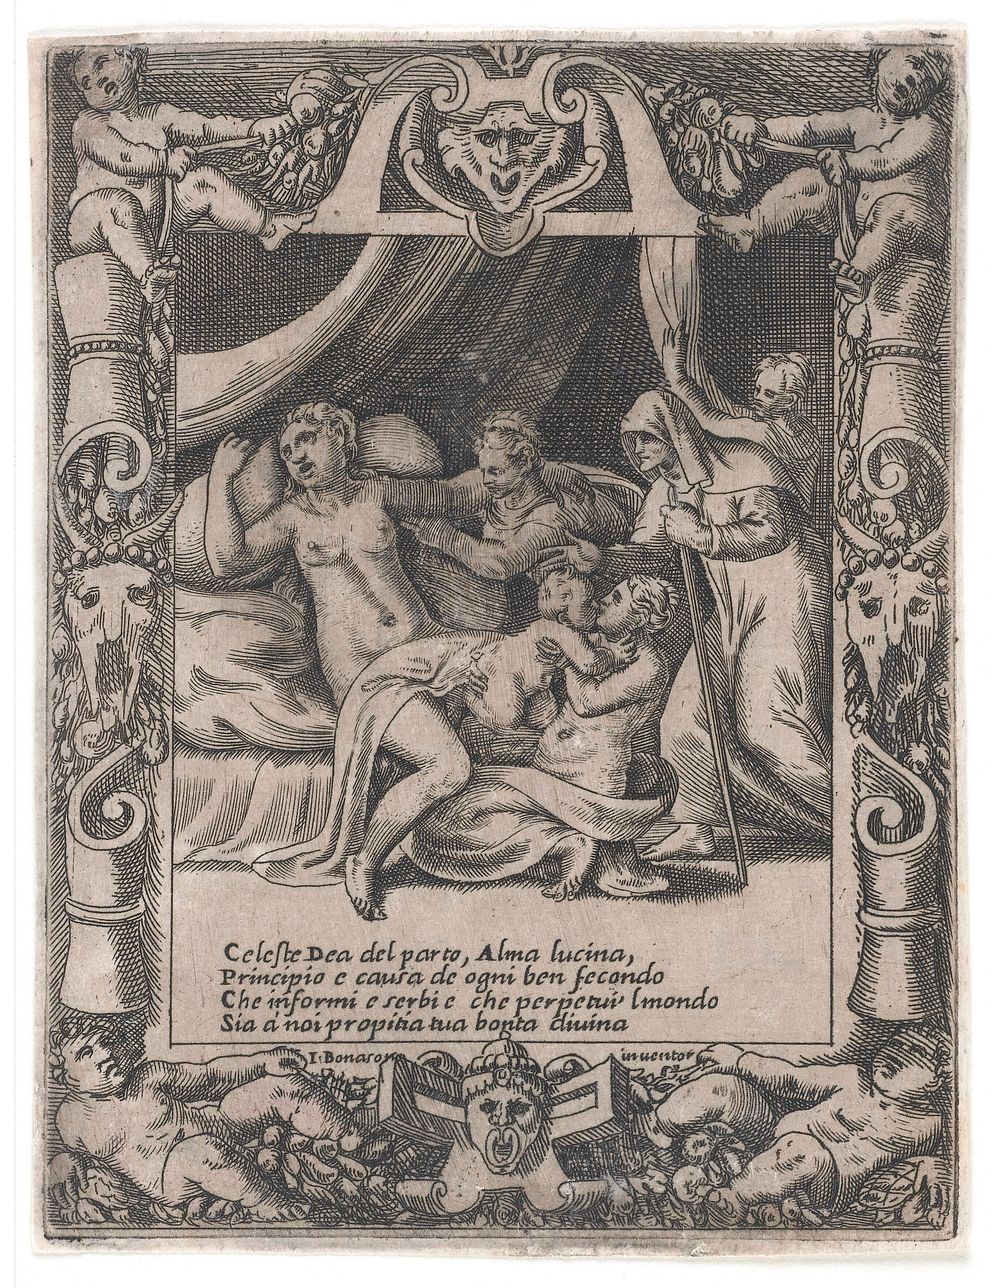 A woman giving birth, calling out to the Roman goddess Lucina. Engraving by G. Bonasone, 15--.